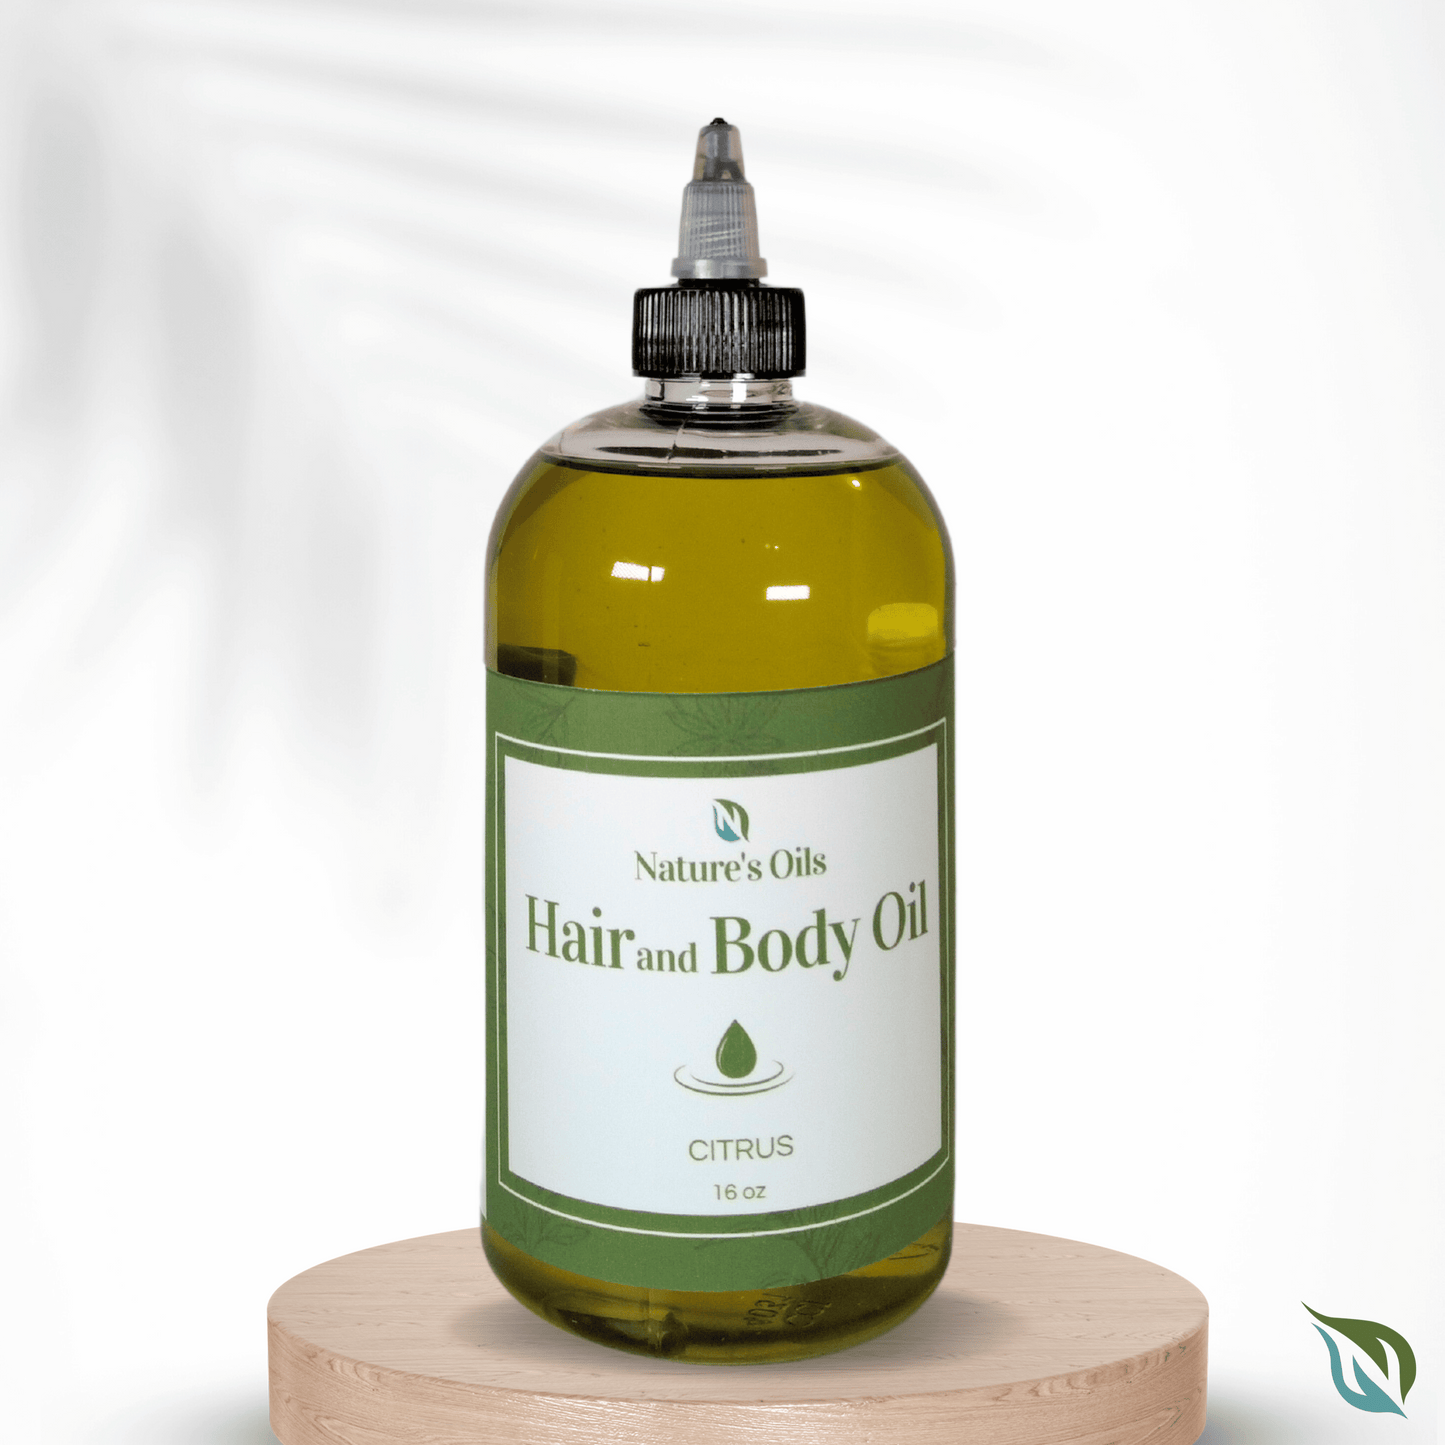 Nature's Oils Hair and Body Oil Citrus 16 oz